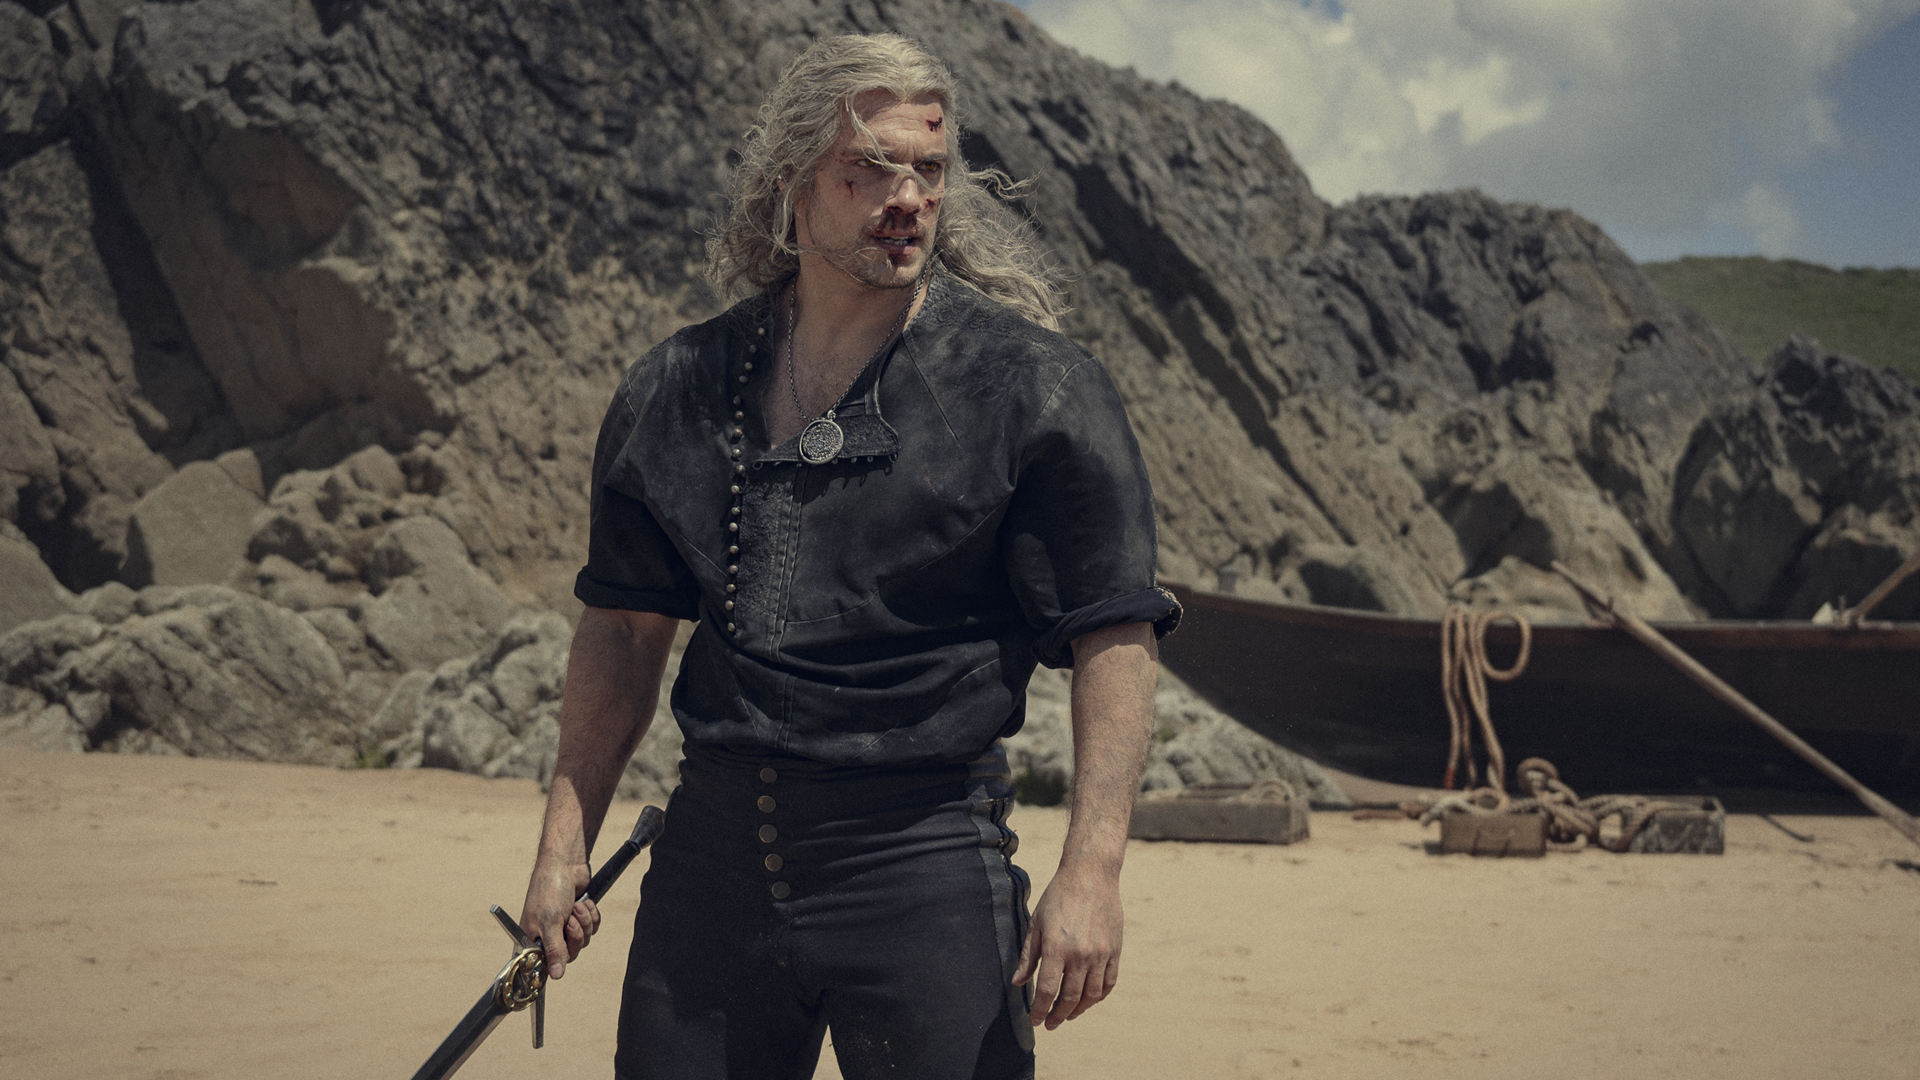 Geralt prepares to fight someone on a beach in The Witcher season 3 volume 2